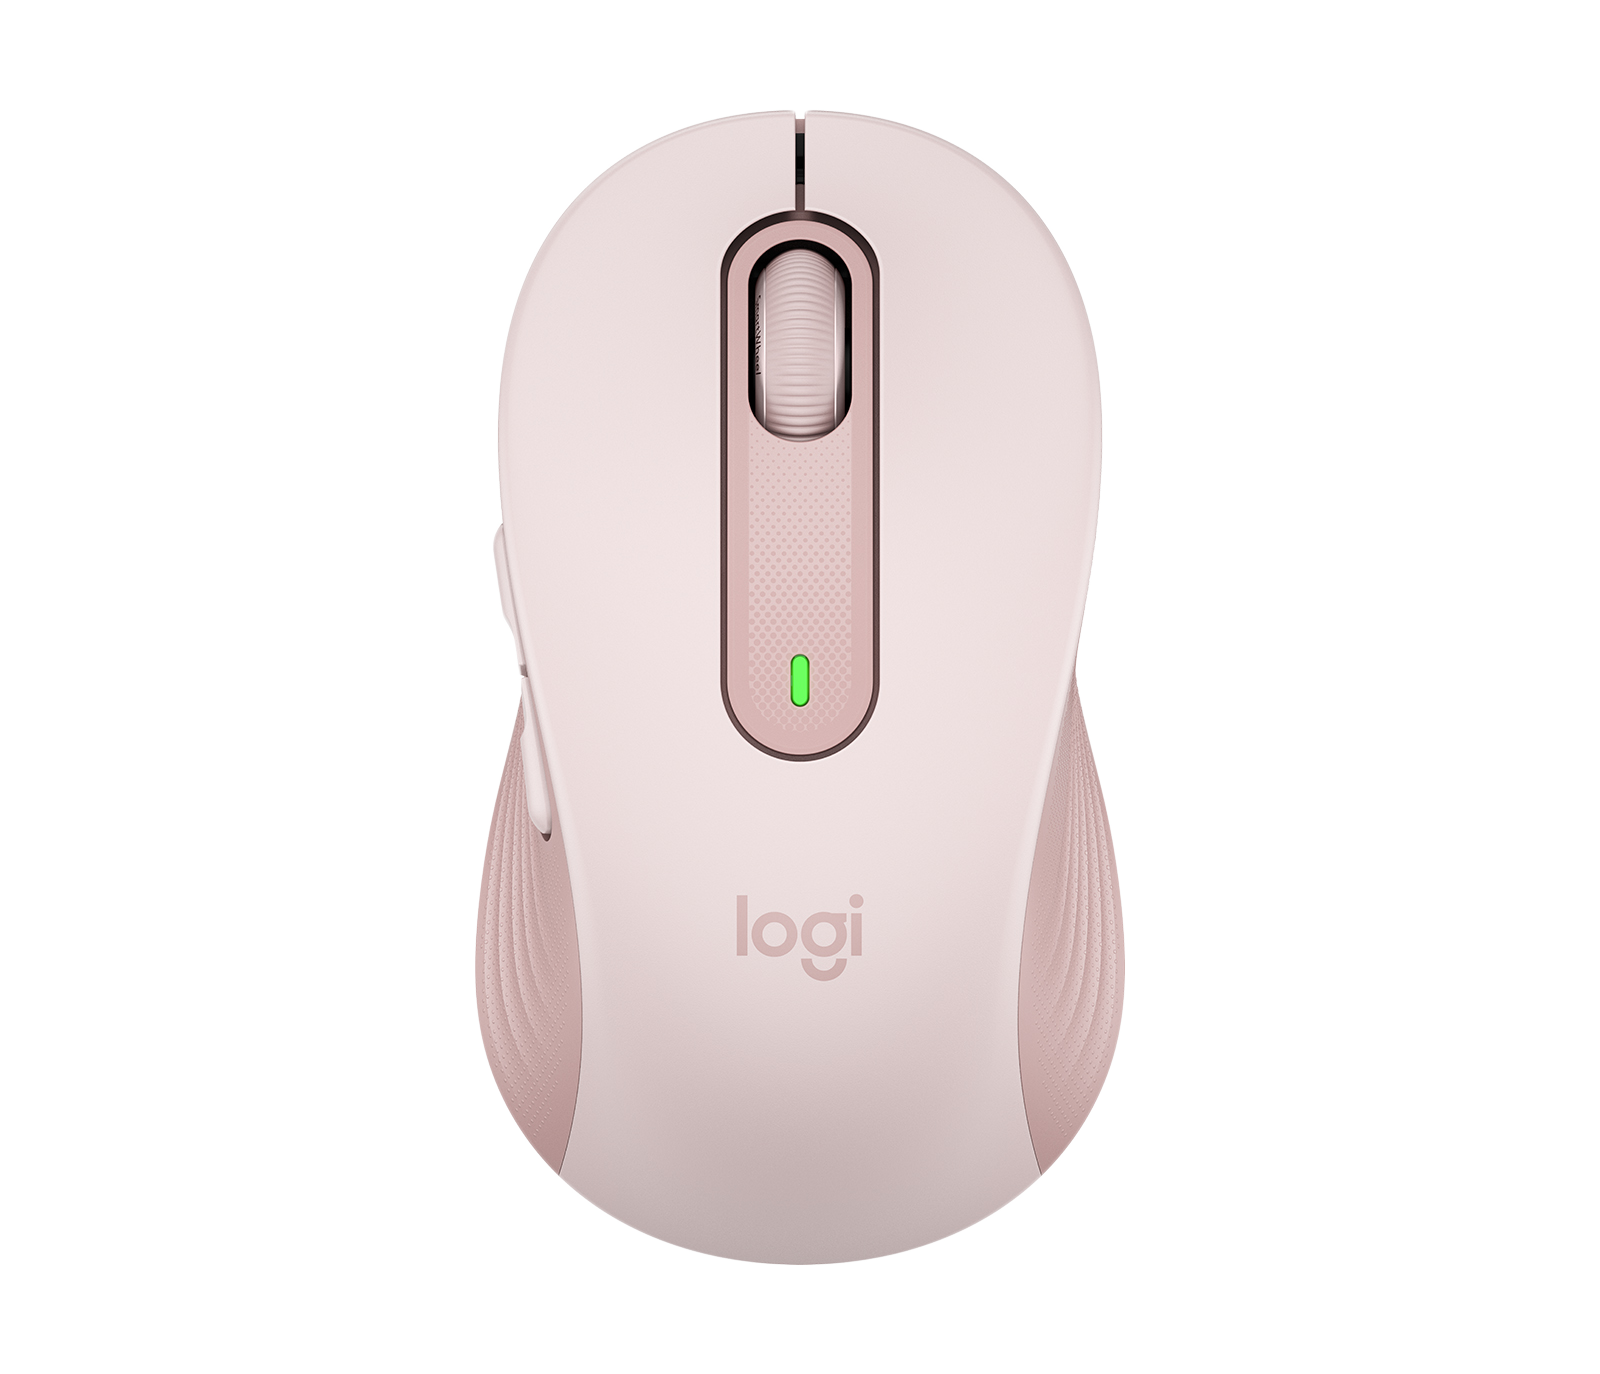 Logitech Signature M650 Right-Handed USB Receiver Wireless Mouse, Graphite